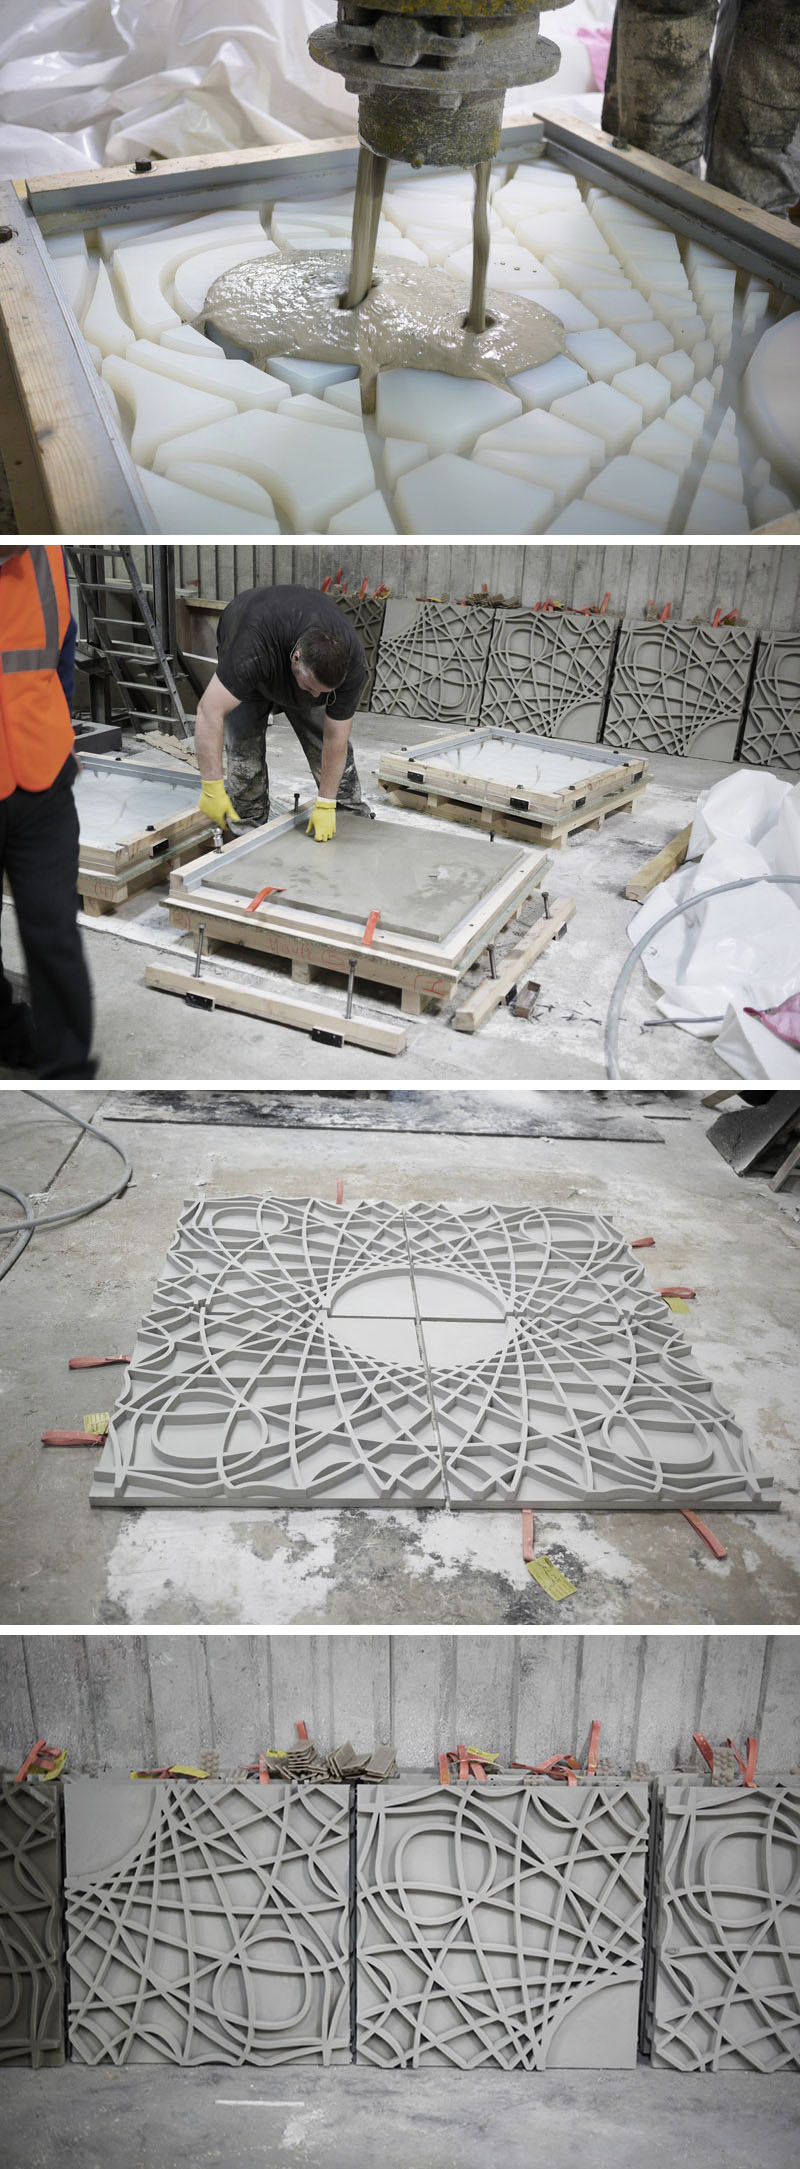 Concrete was poured into molds to create decorative concrete panels that were then installed on the facade of a building in France.